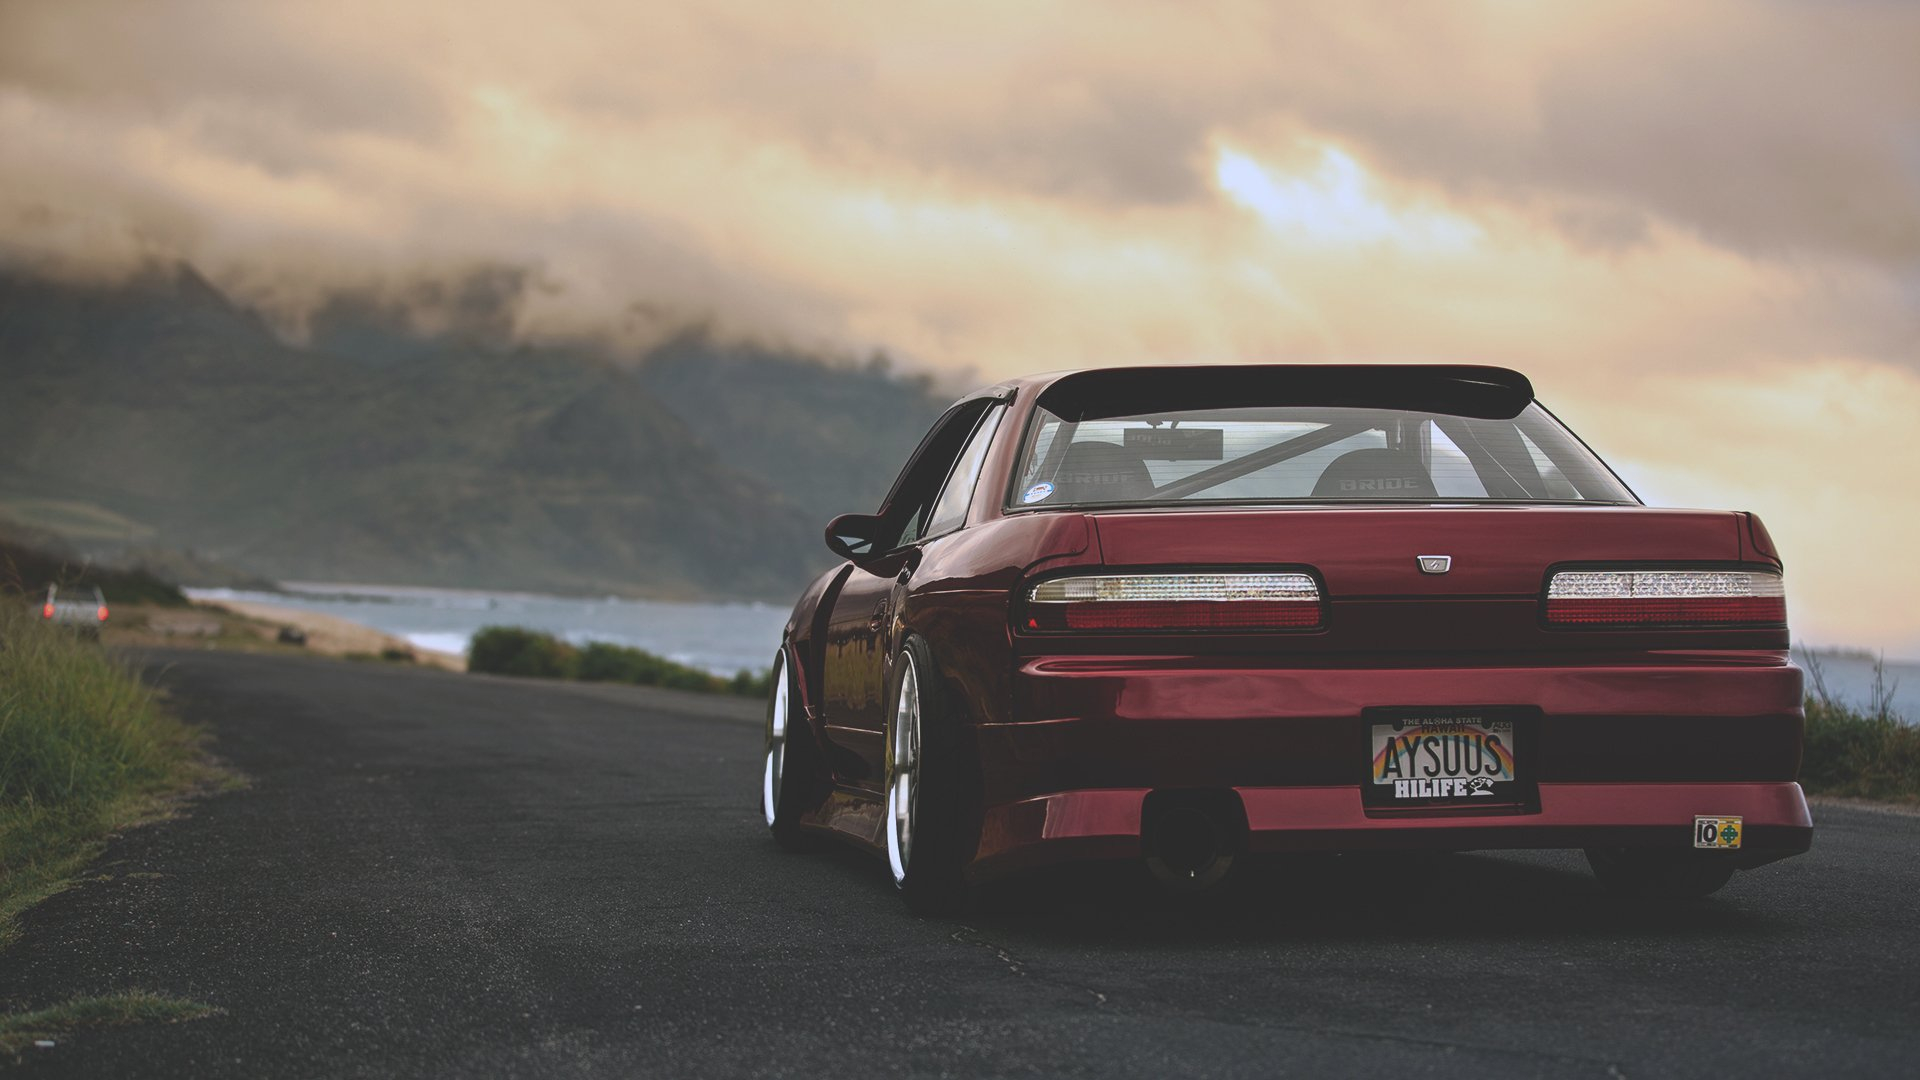 1920x1080 Nissan Silvia S13 HD Wallpapers and Backgrounds